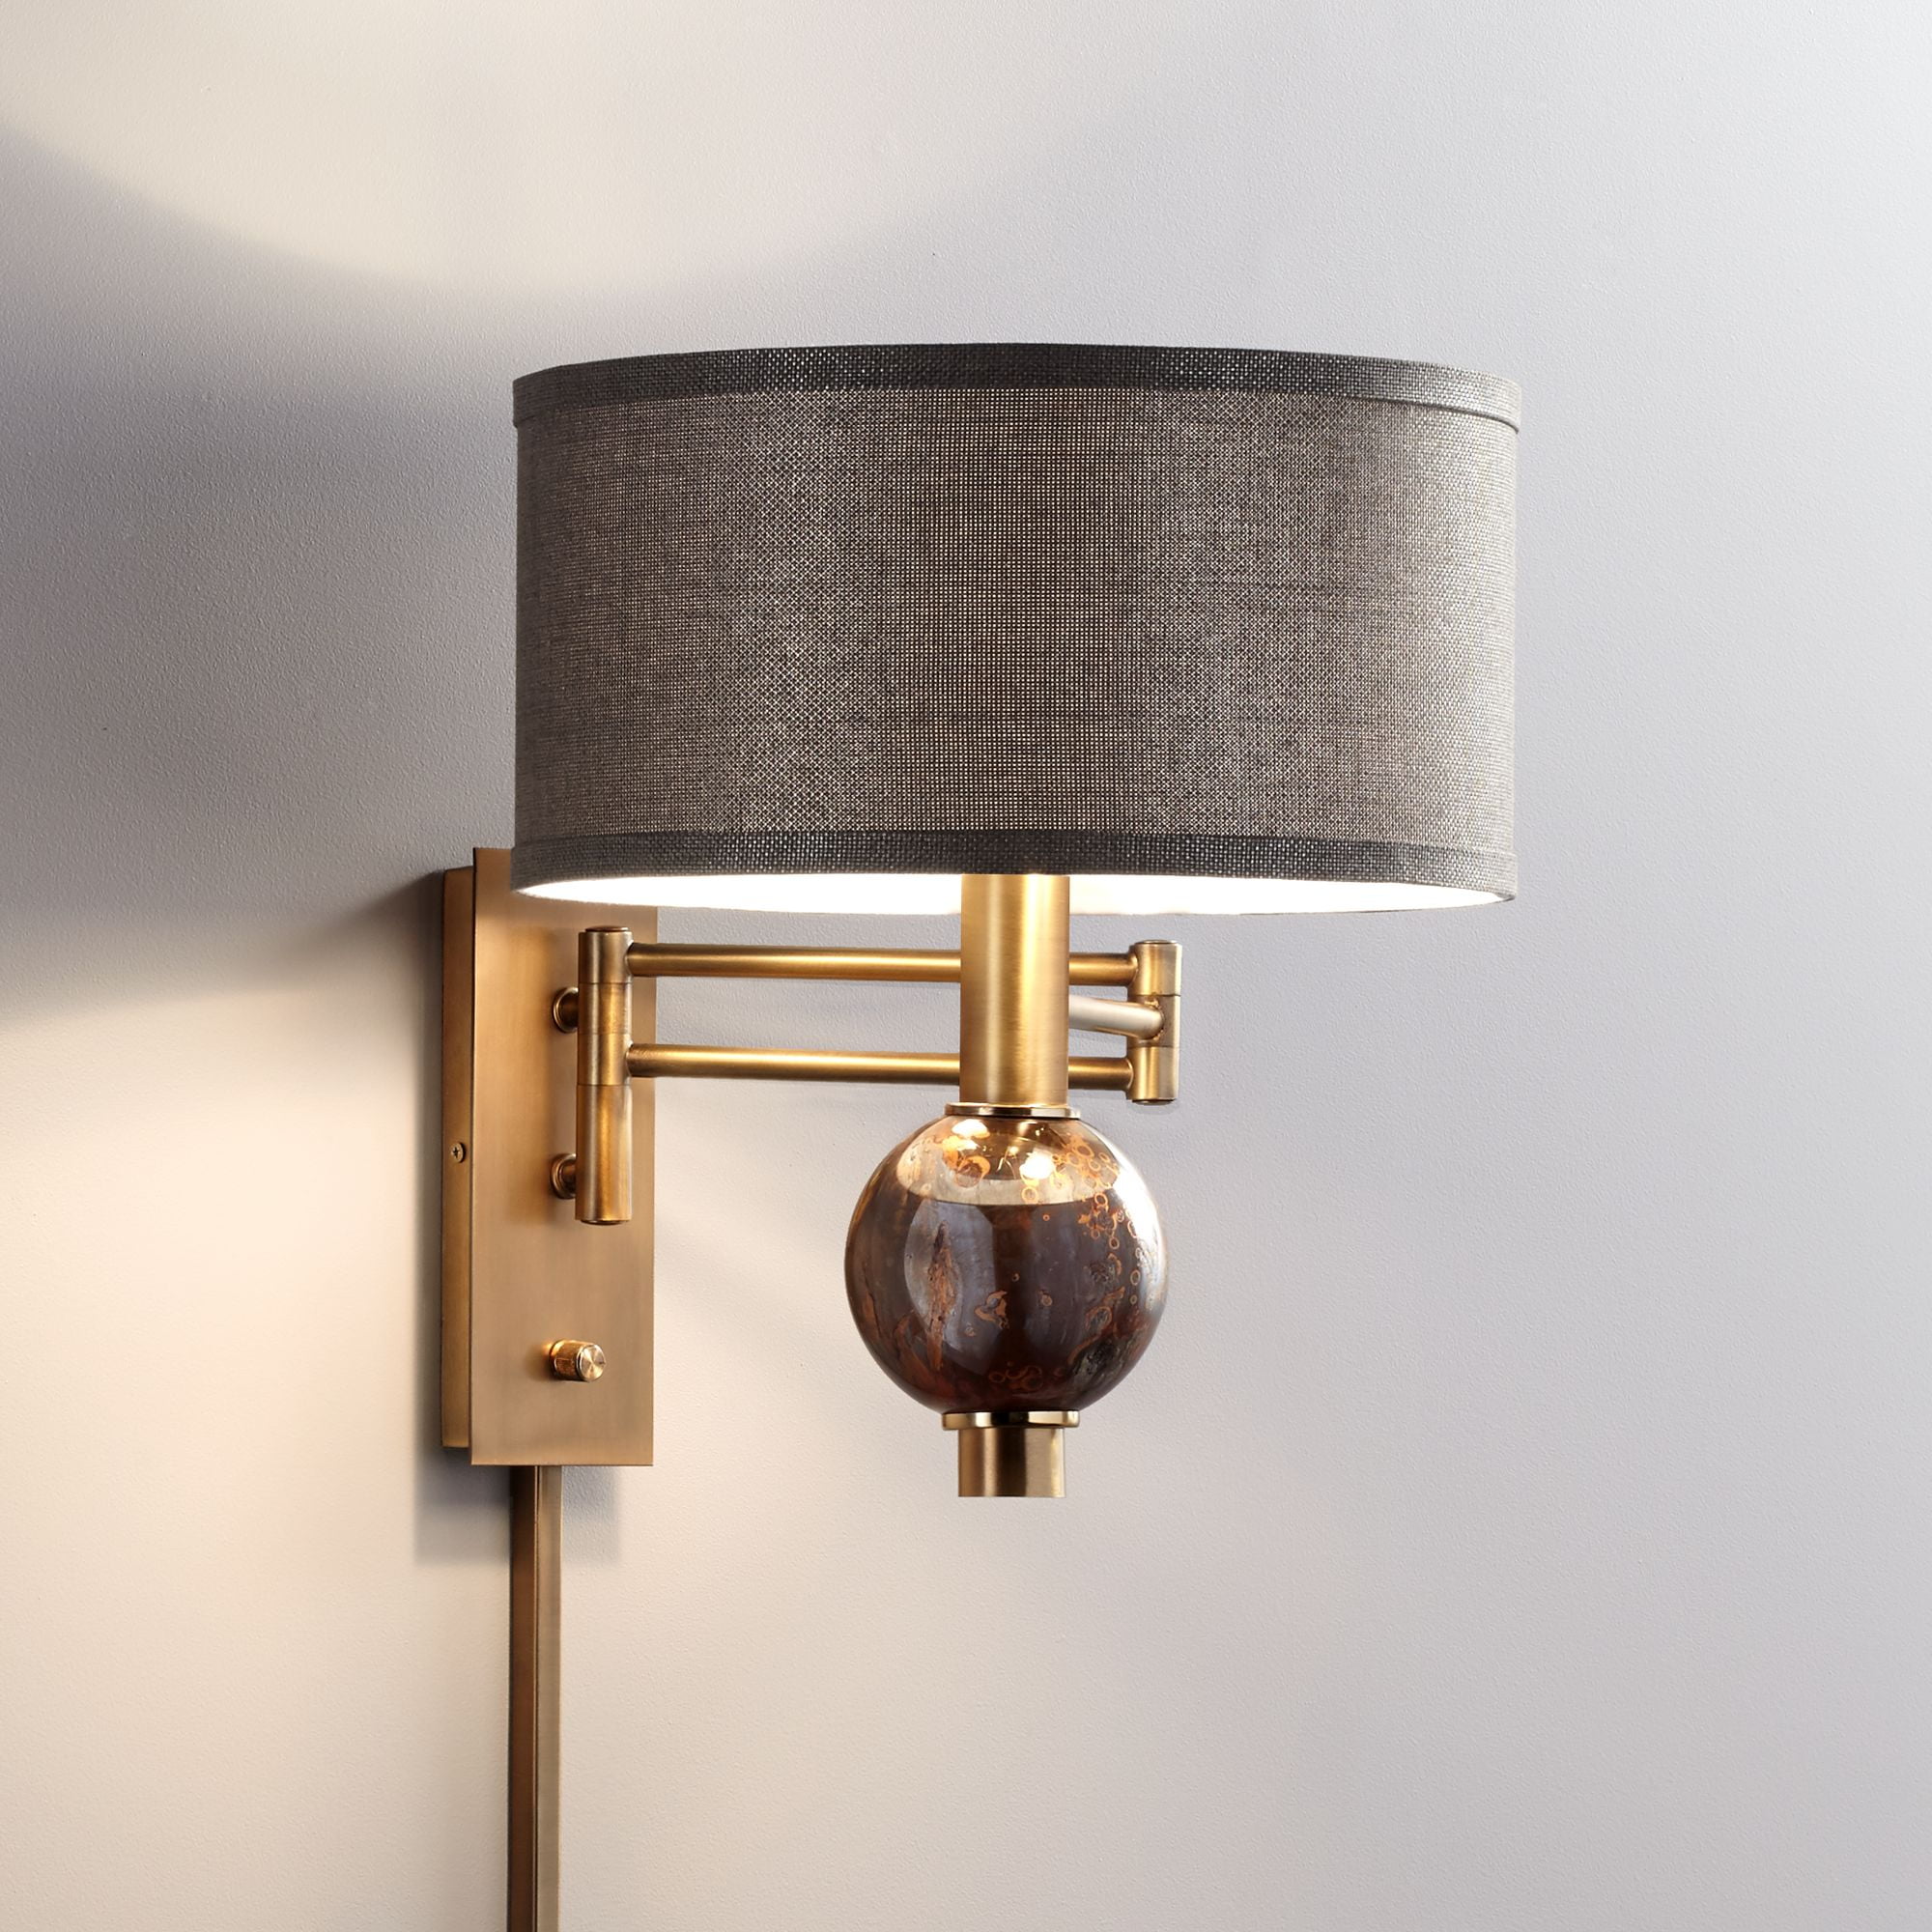 360 Lighting Modern Swing Arm Wall Lamp Painted Polished Brass Plug-In  Light Fixture Dark Taupe Drum Shade for Bedroom Living Room